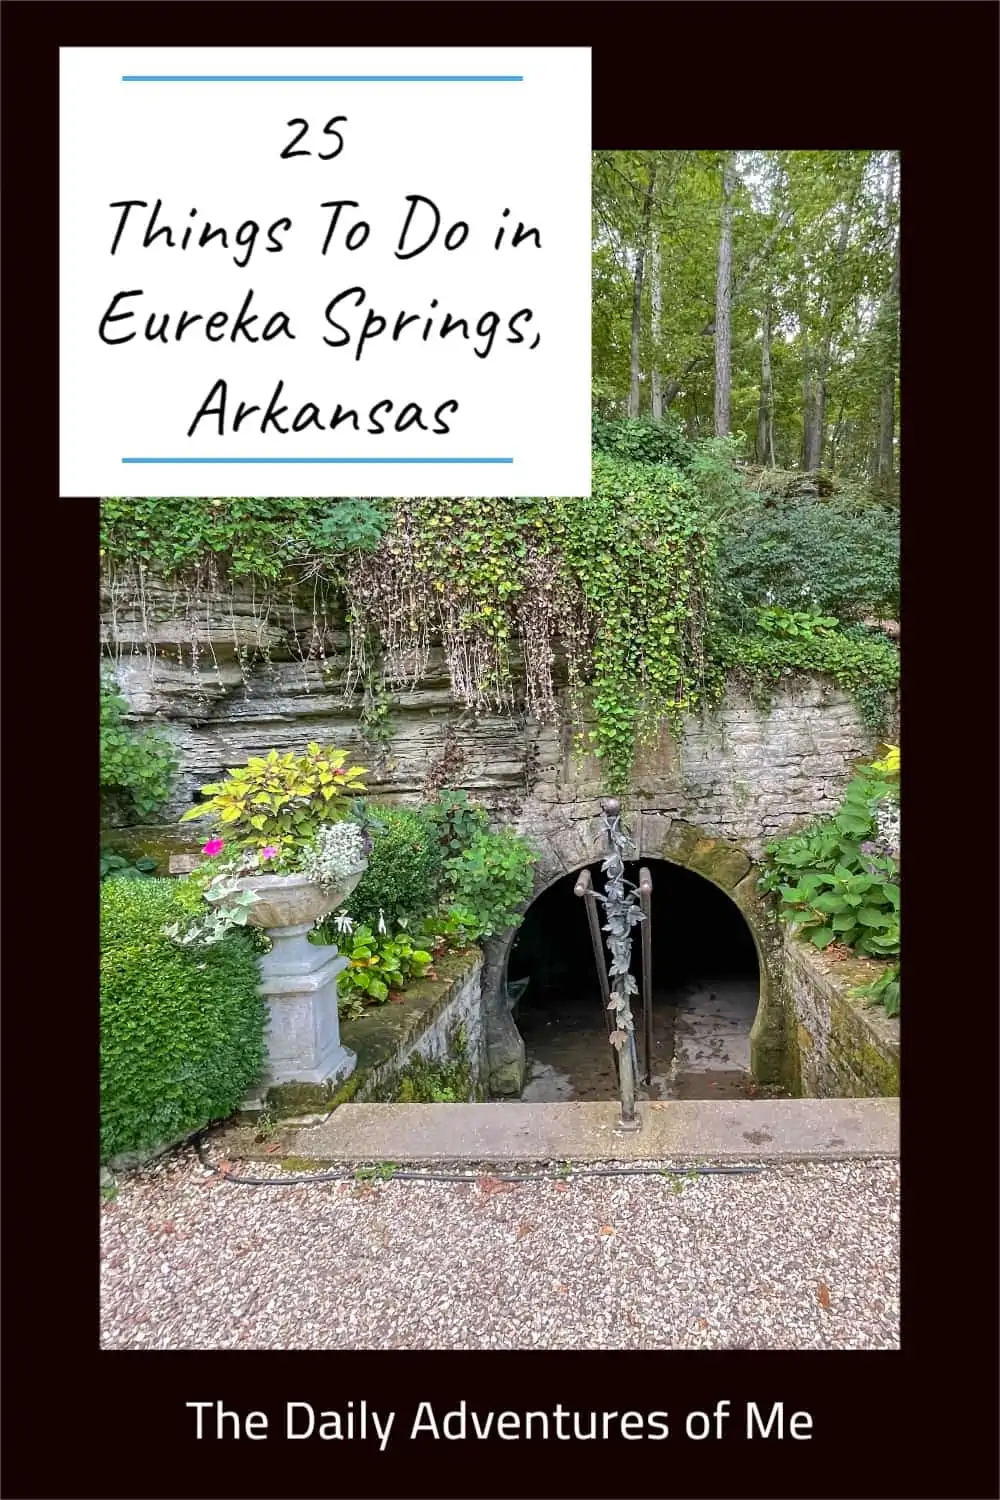 A bohemian town full of decorated hot springs lies in the Ozark Mountains on the border of Arkansas and Missouri. Explore all the interesting things you can find in Eureka Springs, Arkansas. #hosted @crescenthotel @Eurekasprings #CharmingUSTowns